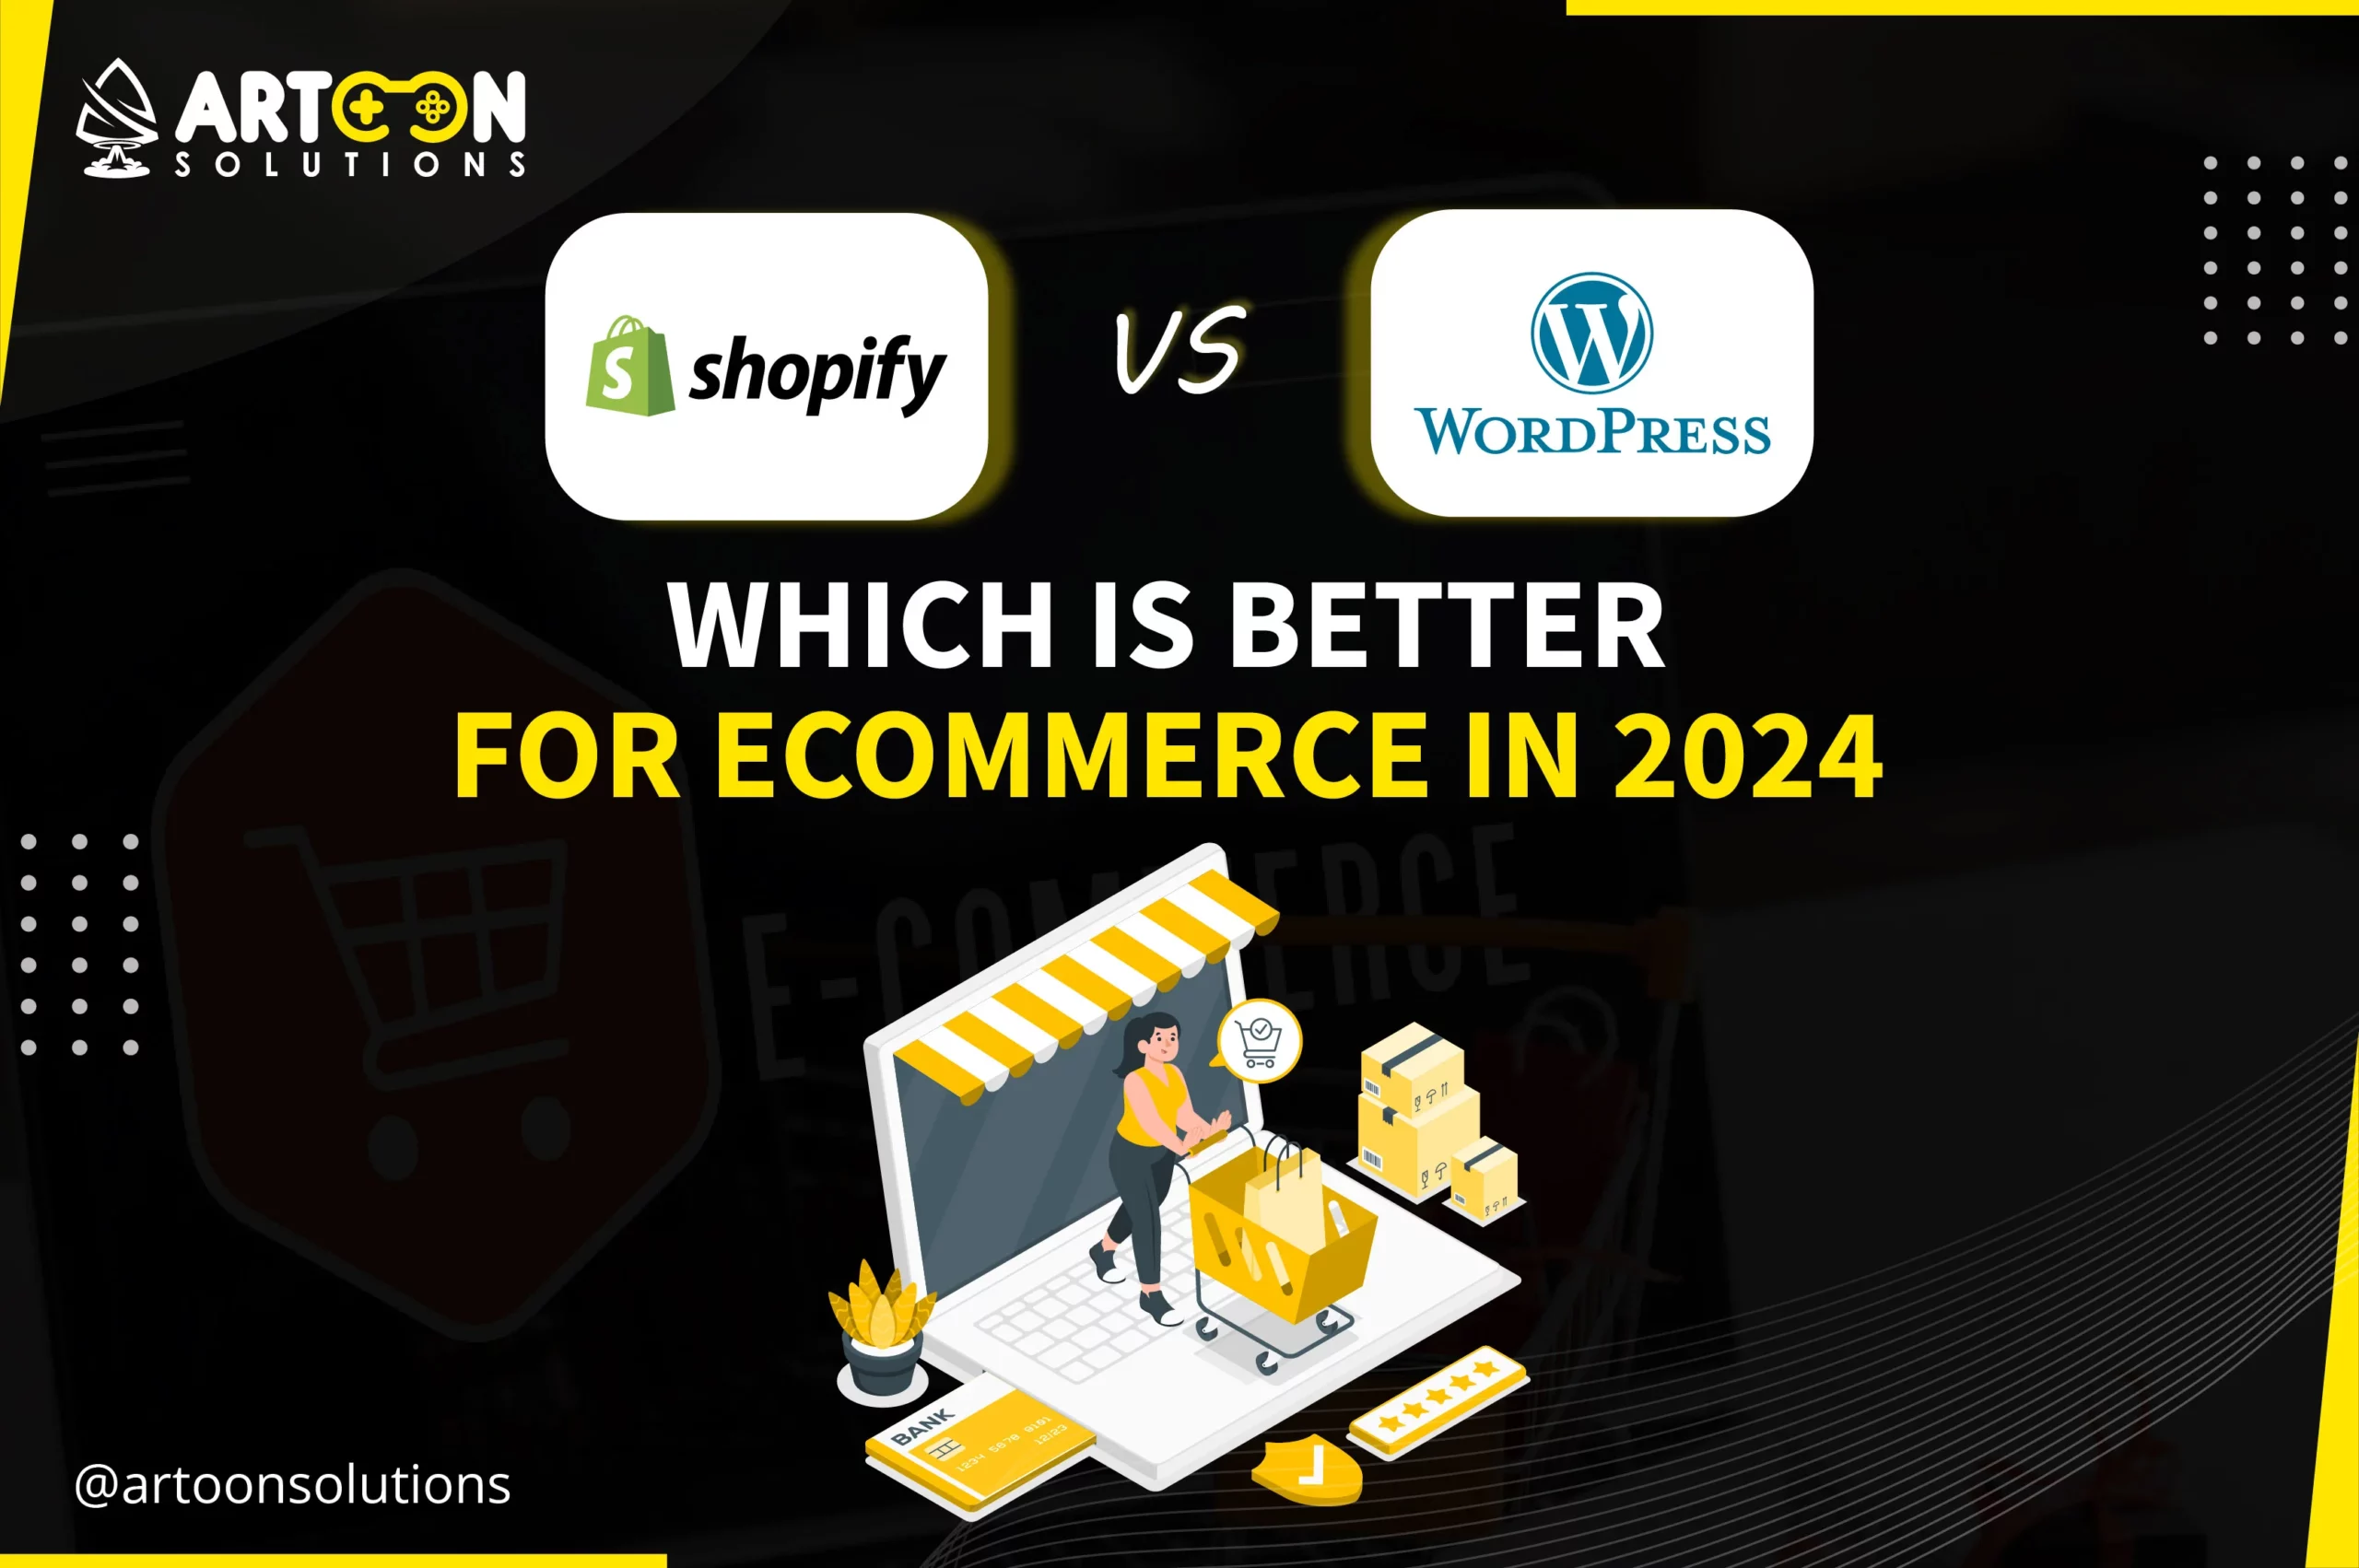 which is better for ecommerce in 2024